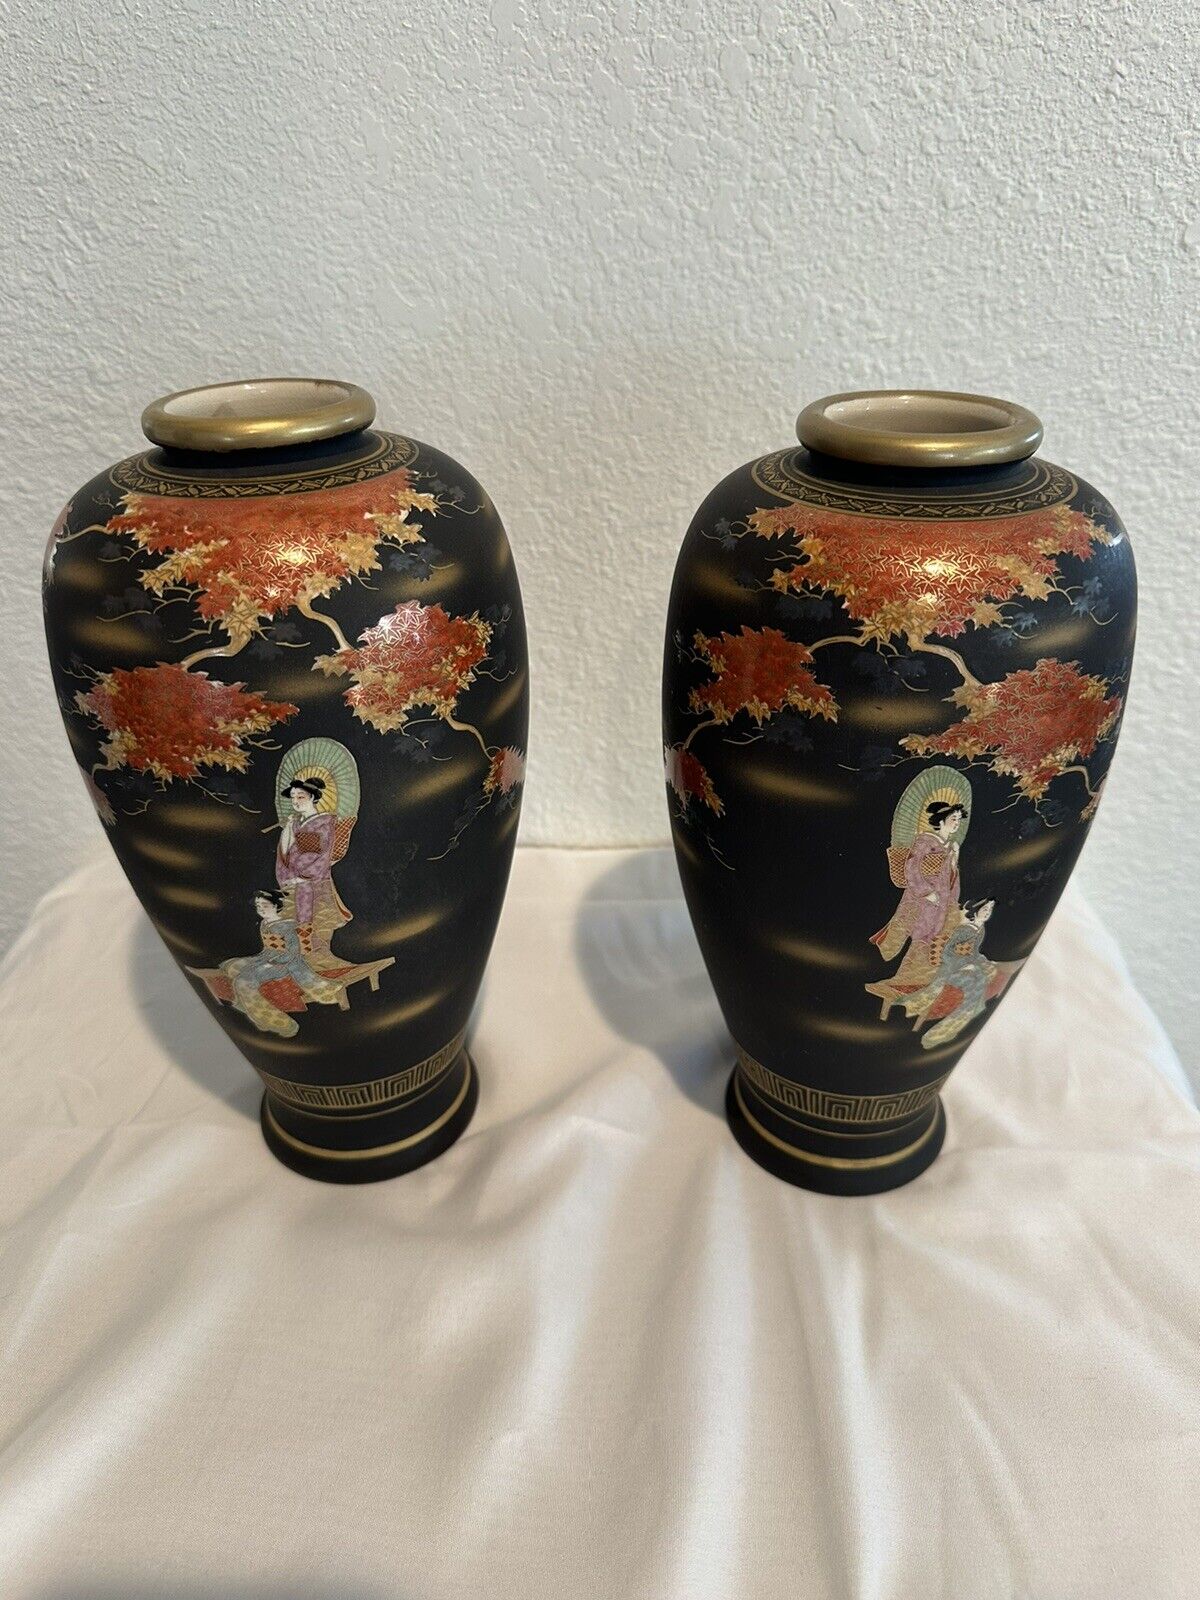 10” Vintage Japanese Vases, Black With Gold Trim and A Geisha Design. Pair